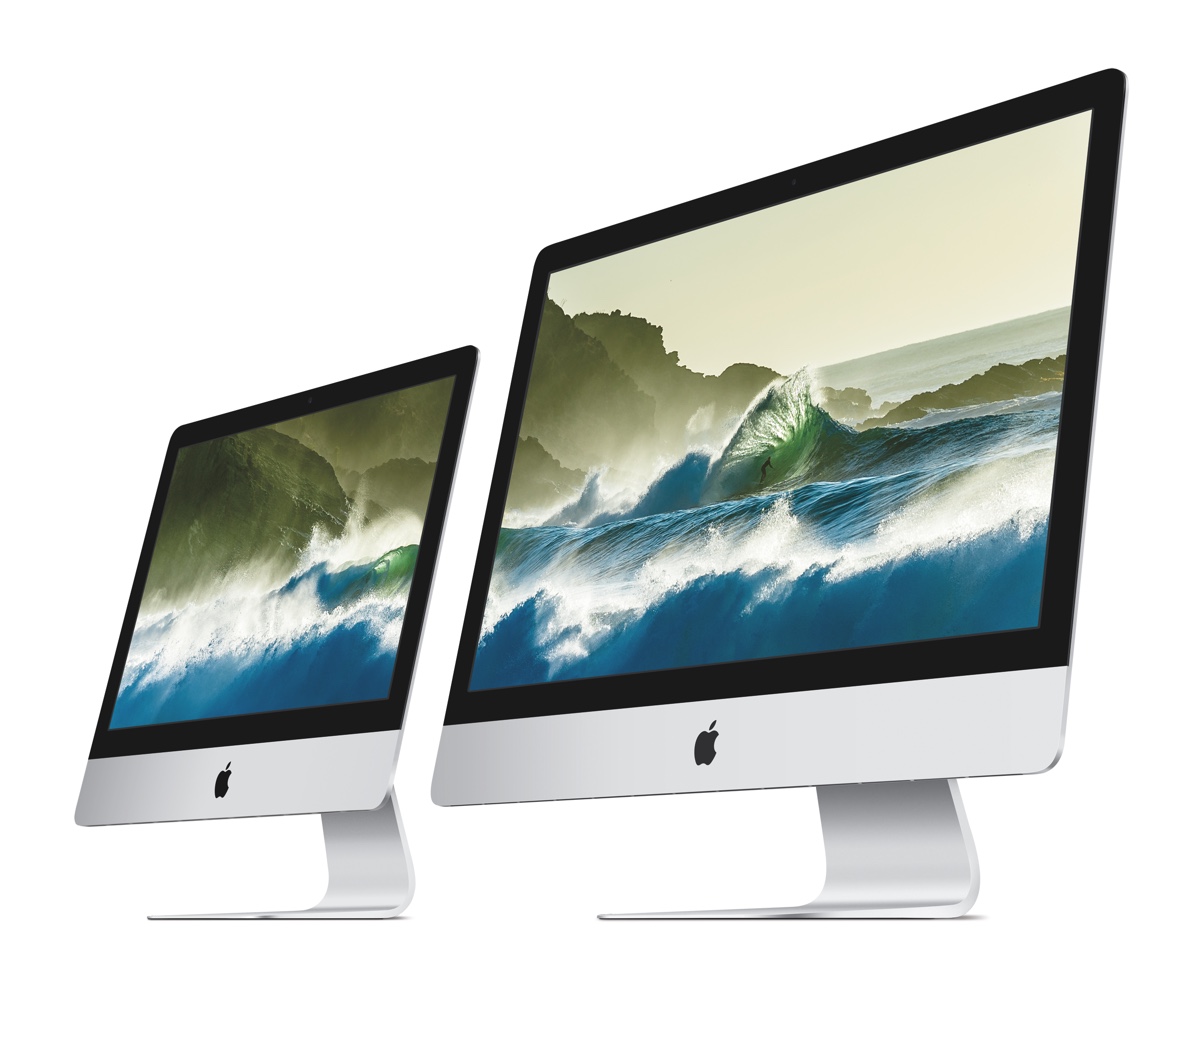 Apple Plans Modest Updates to Mac Lineup in 2017 - New iMac with USB-C, Minor Processor Bumps for MacBooks